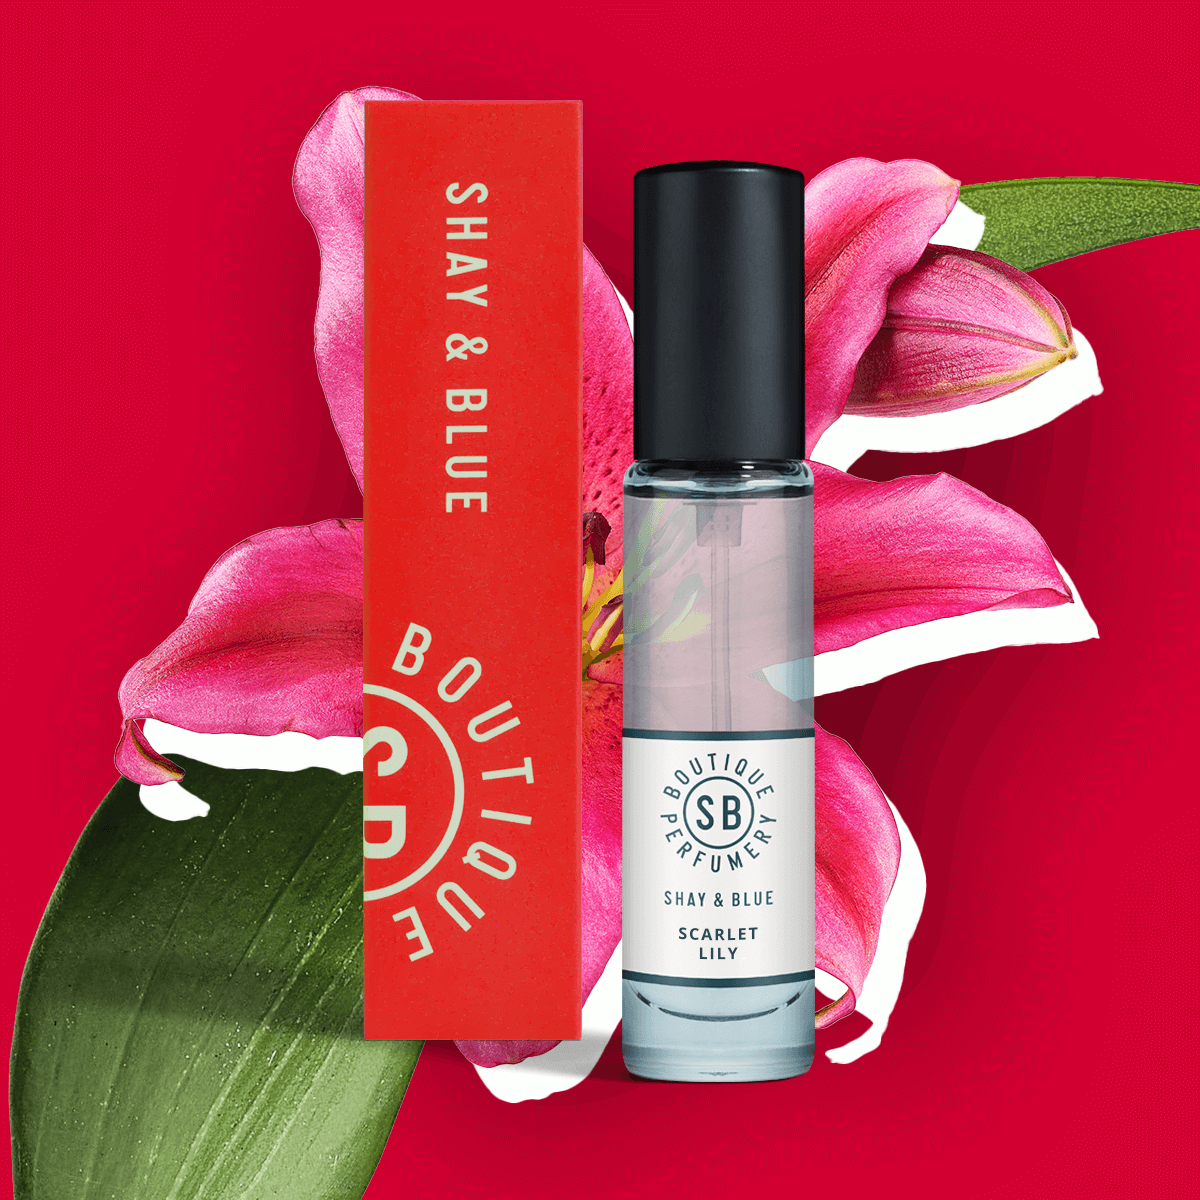 Scarlet Lily Fragrance 10ml | Big Blooms of Scarlet lily with undertones of ylang ylang. | Clean All Gender Fragrance | Shay & Blue